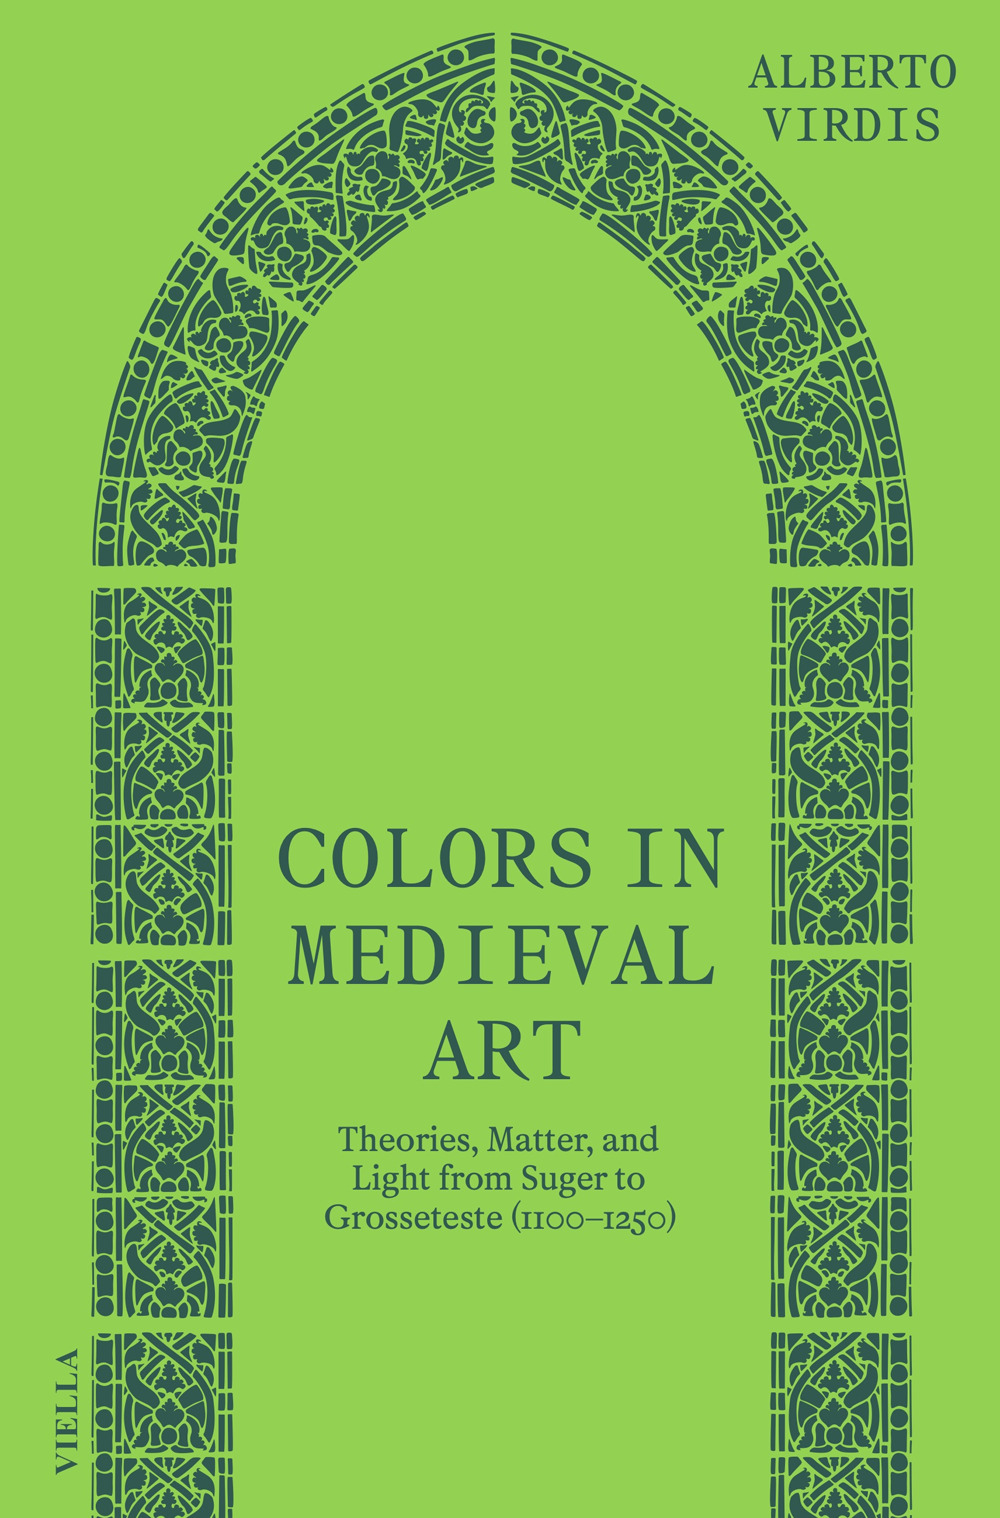 Colors in medieval art. Theories, matter, and light from Suger to Grosseteste (1100-1250)